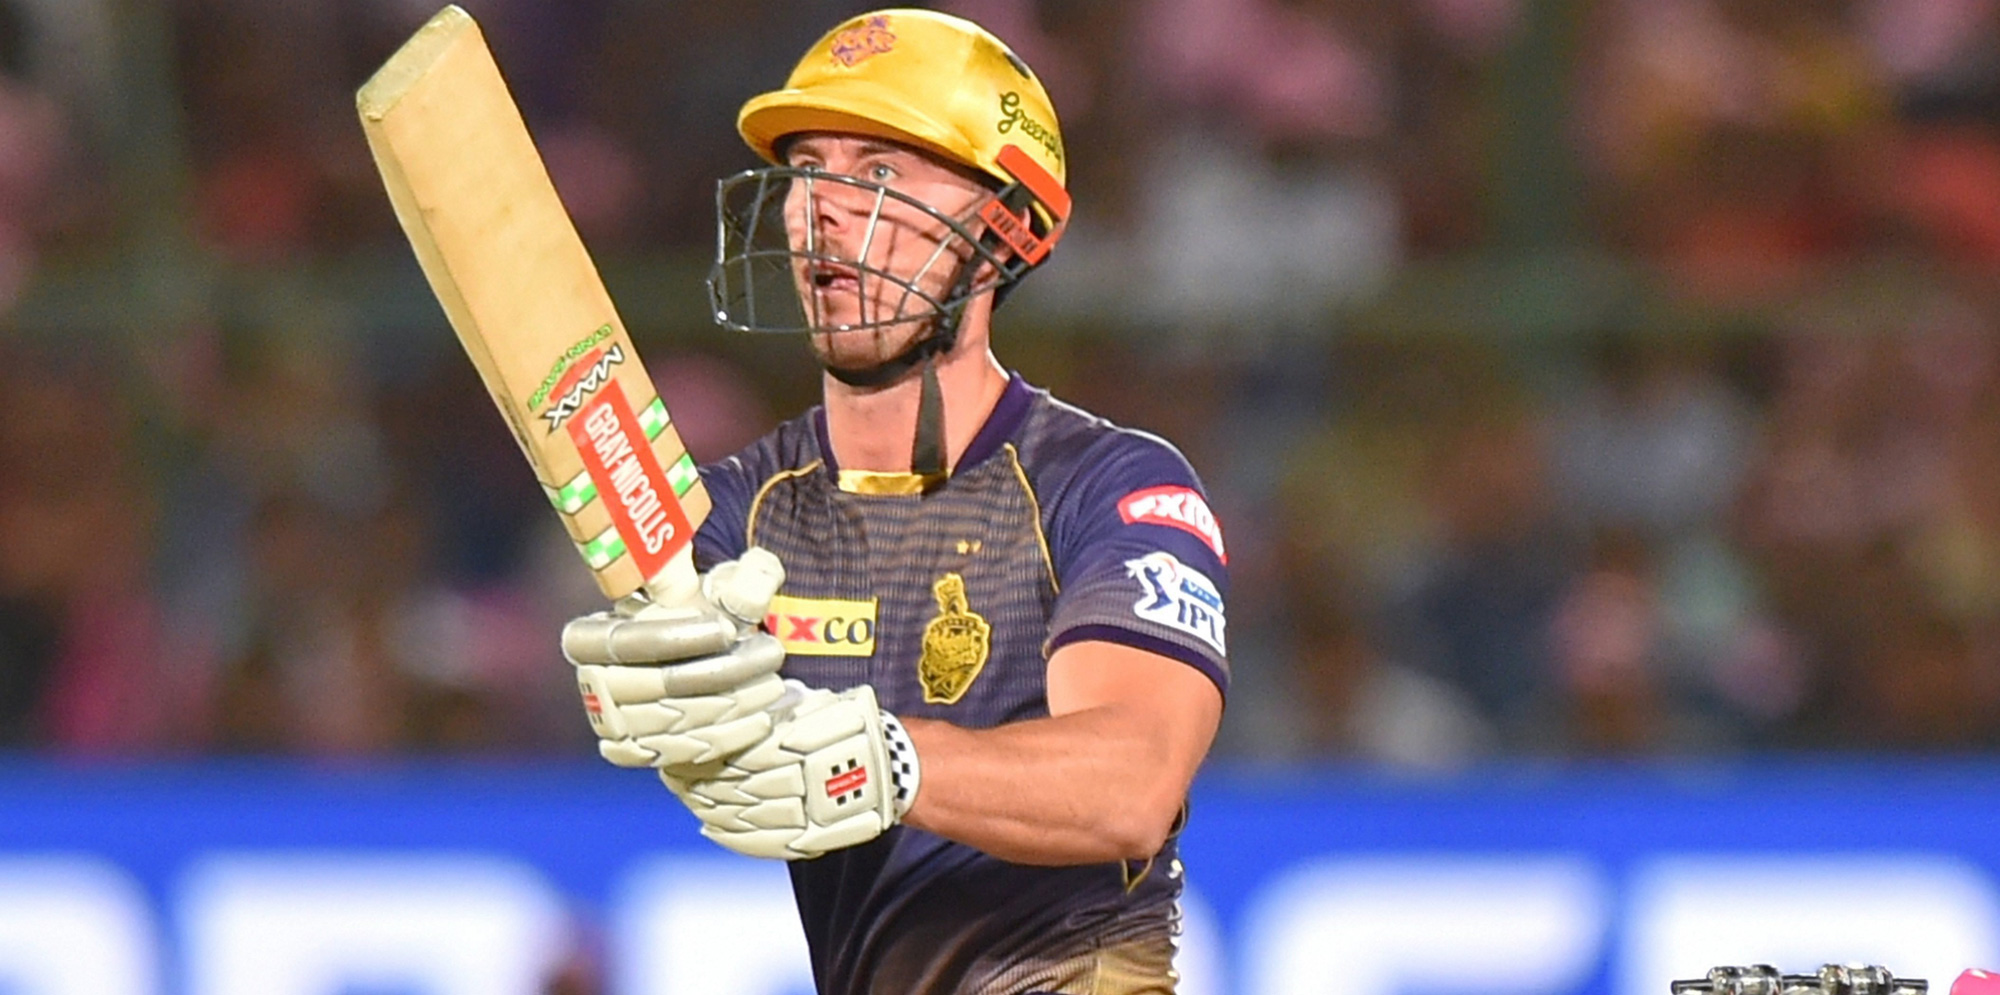 Chris Lynn plays a shot during the Indian Premier League 2019 cricket match between Rajasthan Royals (RR) and Kolkata Knight Riders (KKR), in Jaipur on Sunday, April 7, 2019.